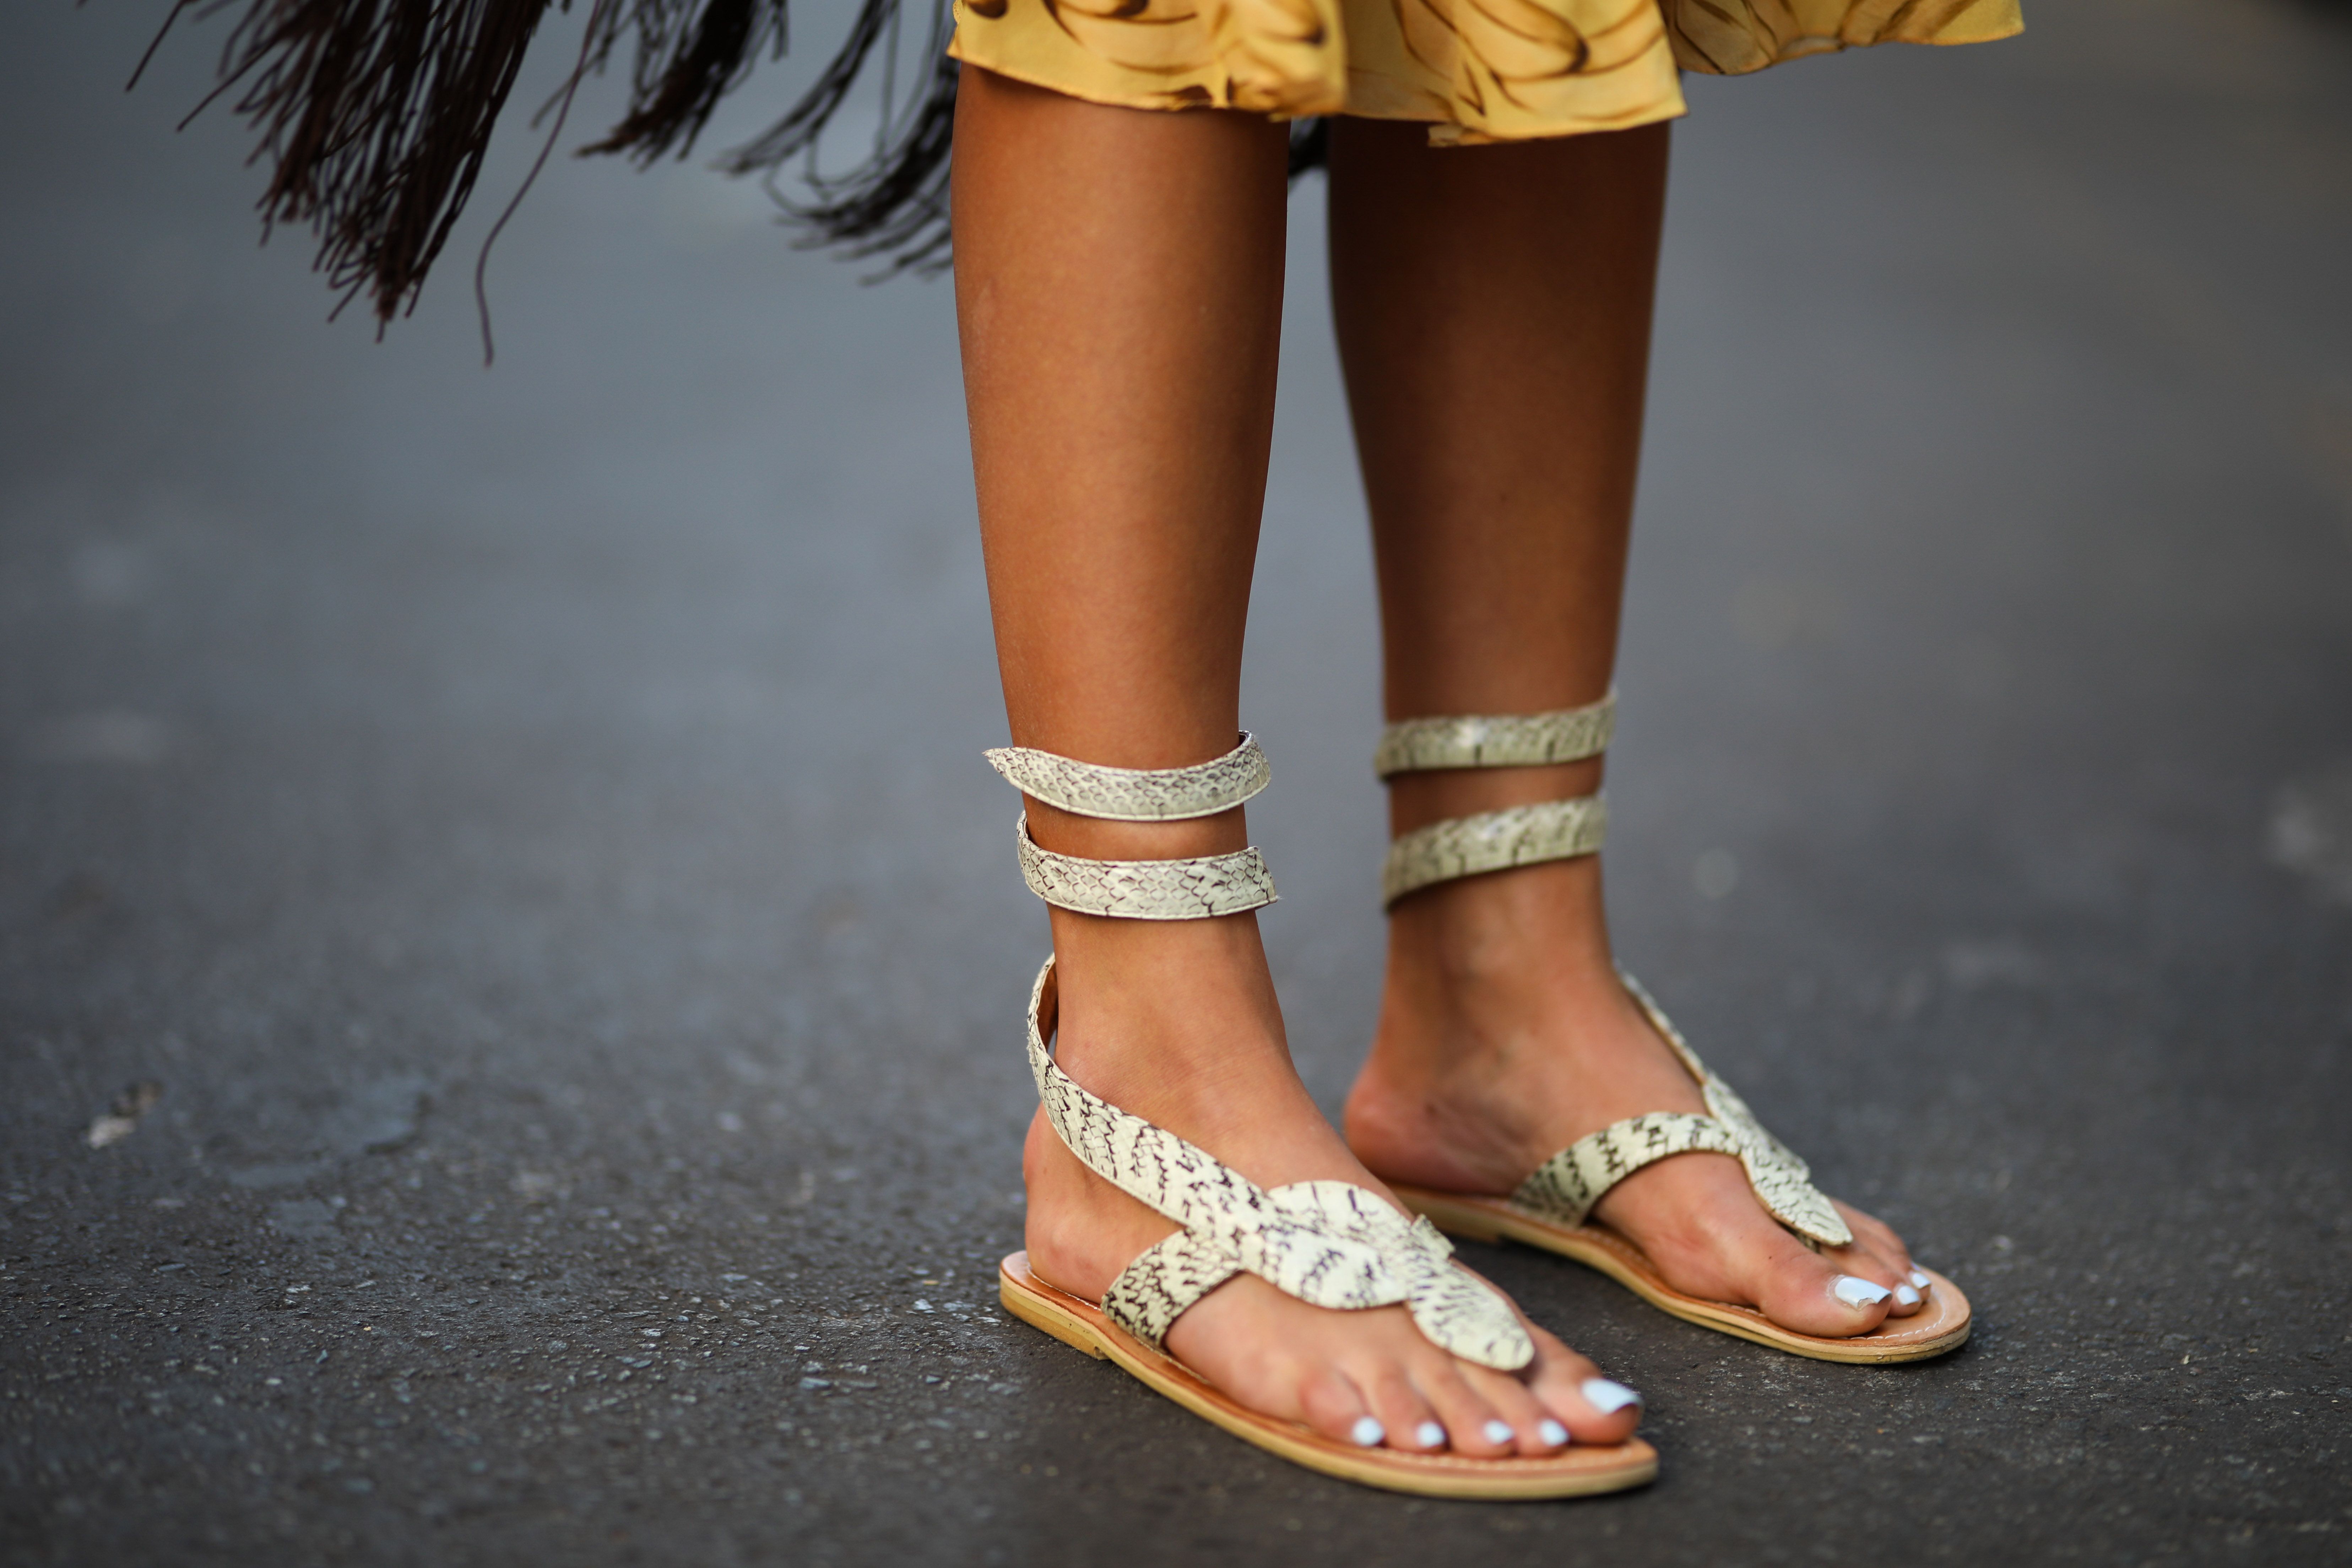 Definitive guide: How to wear your sandals with style this summer